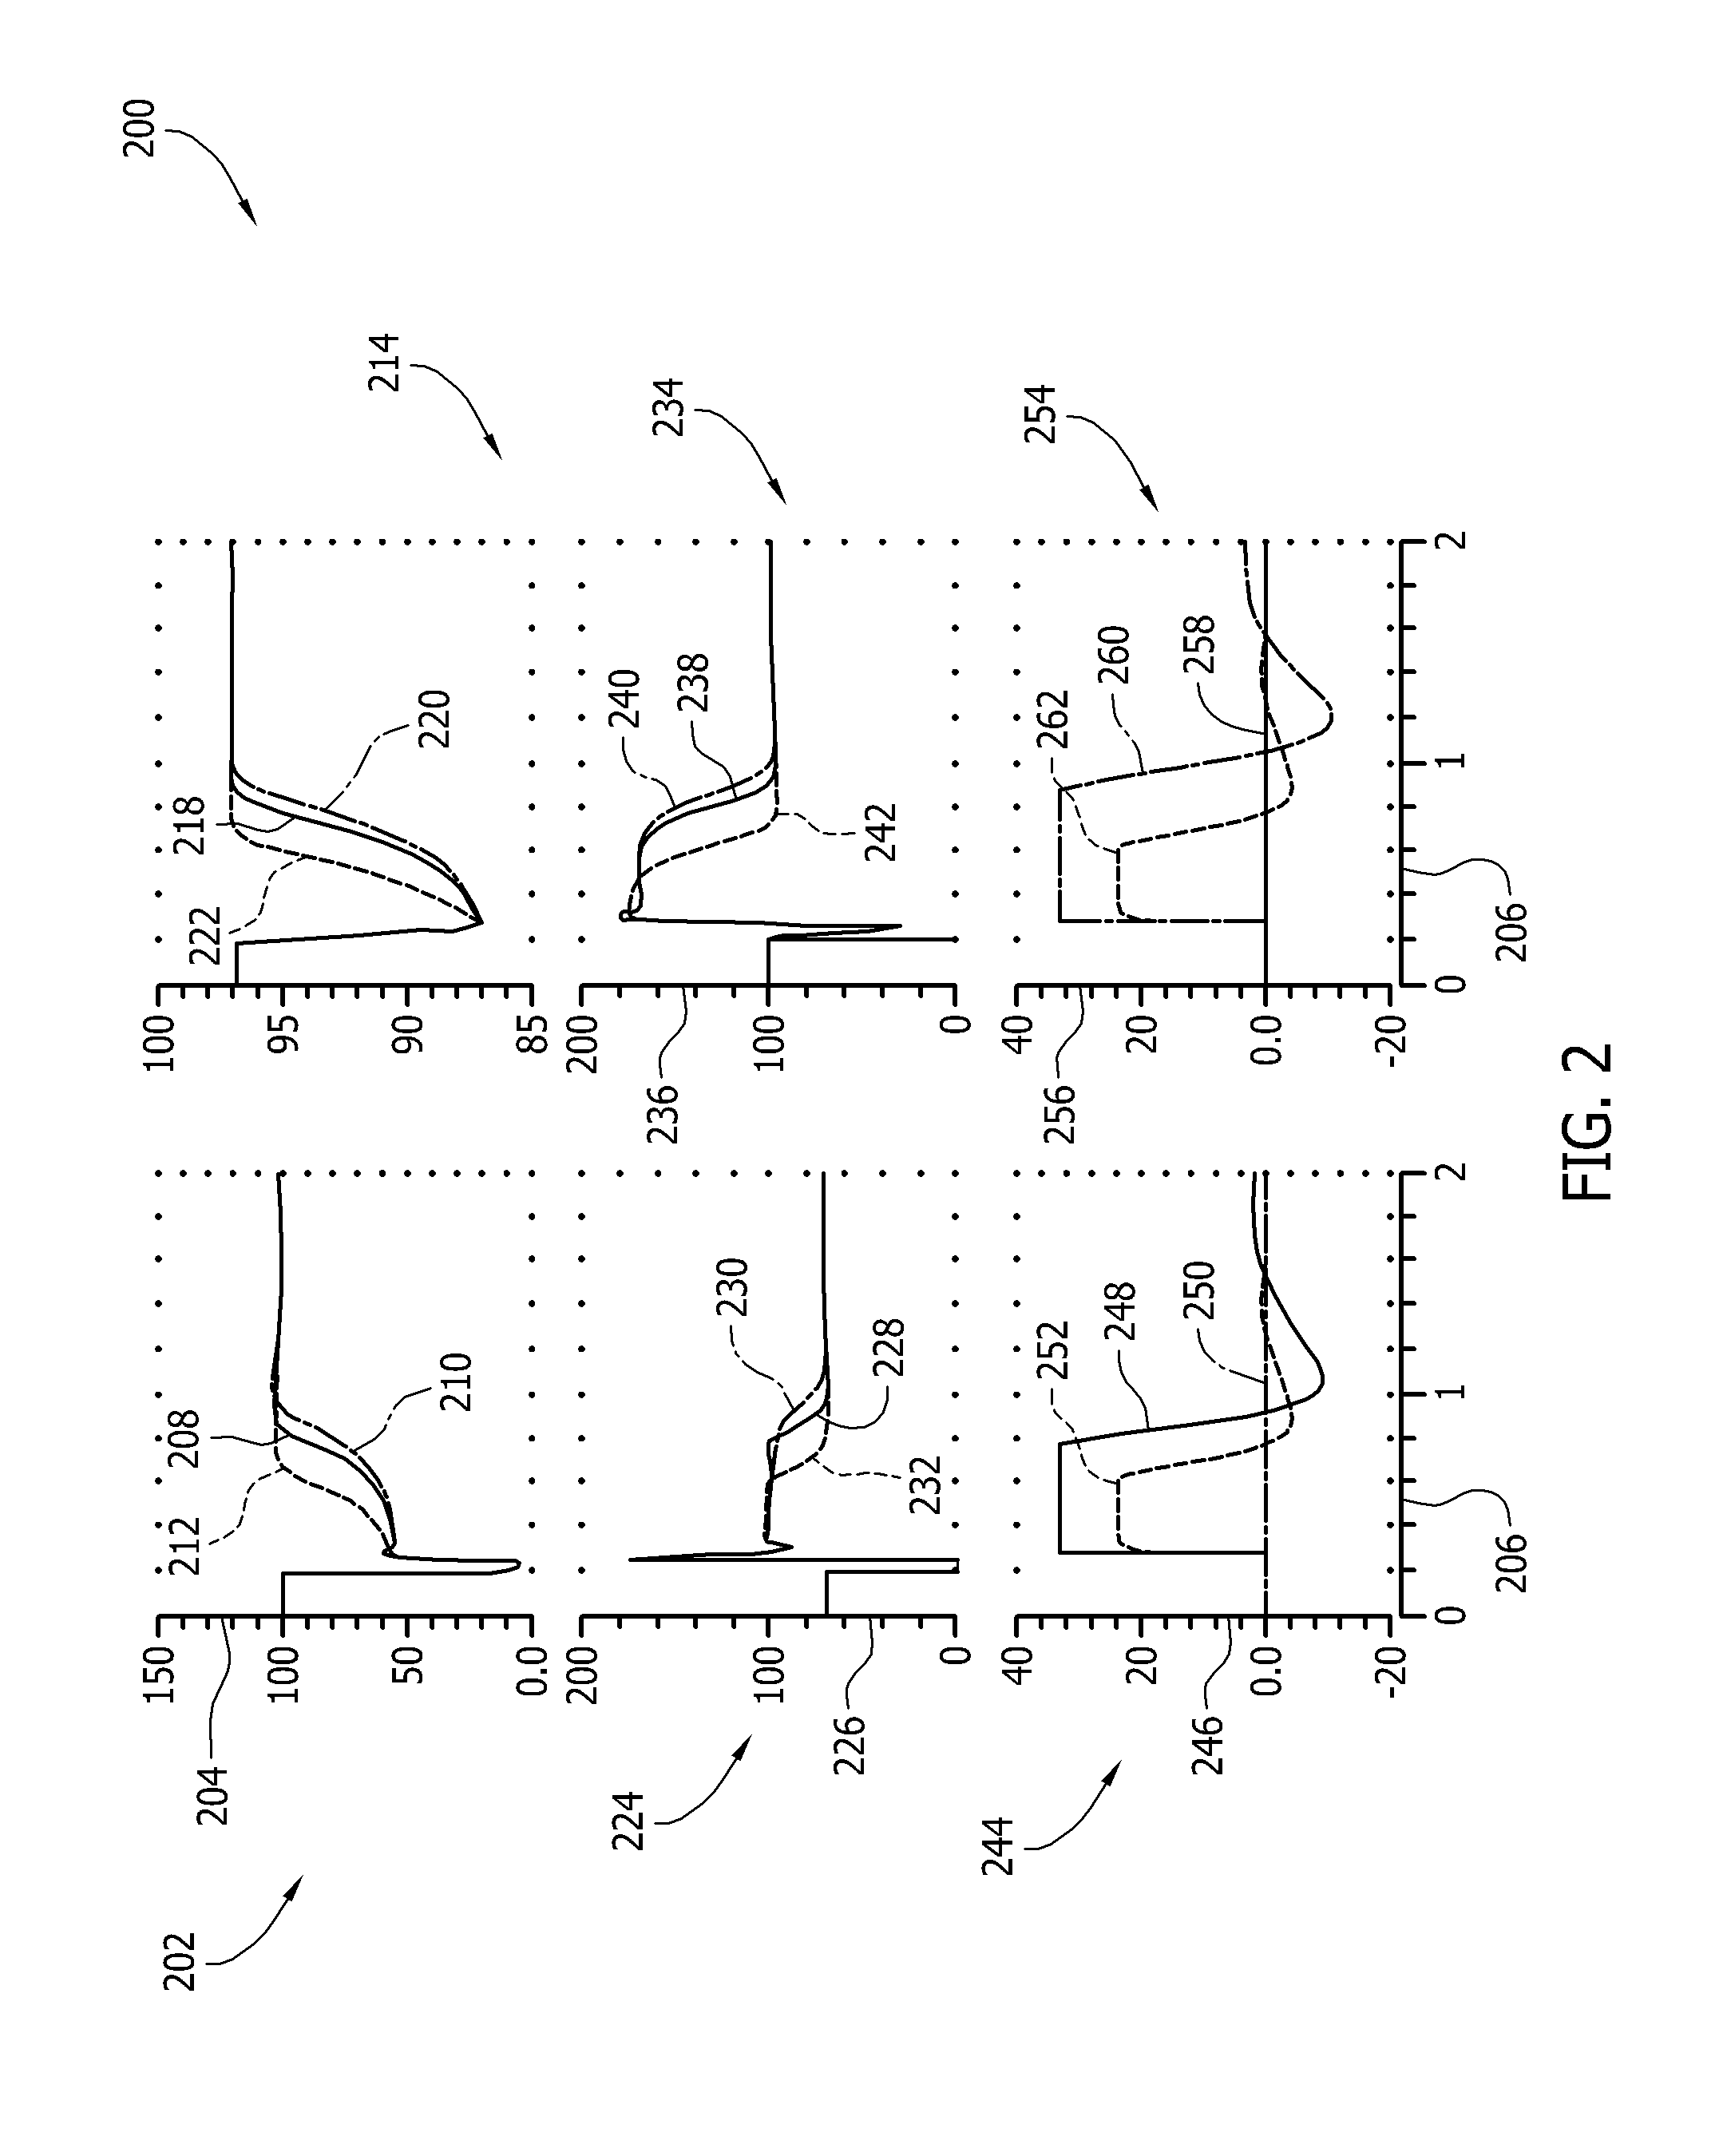 Method and apparatus for control of fault-induced delayed voltage recovery (FIDVR) with photovoltaic and other inverter-based devices